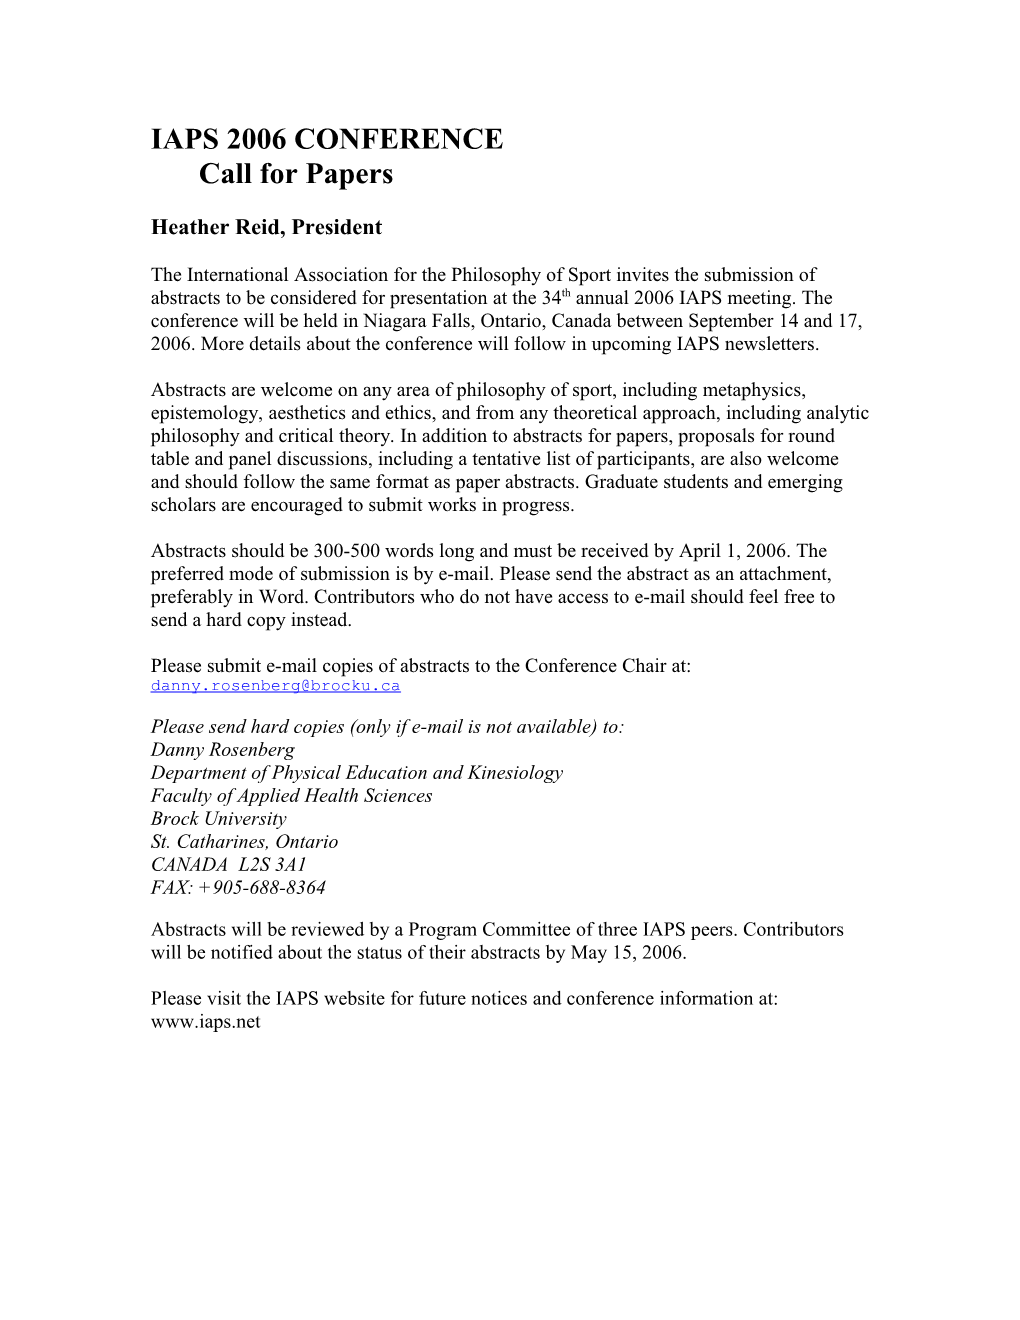 IAPS 2006 Conferencecall for Papers